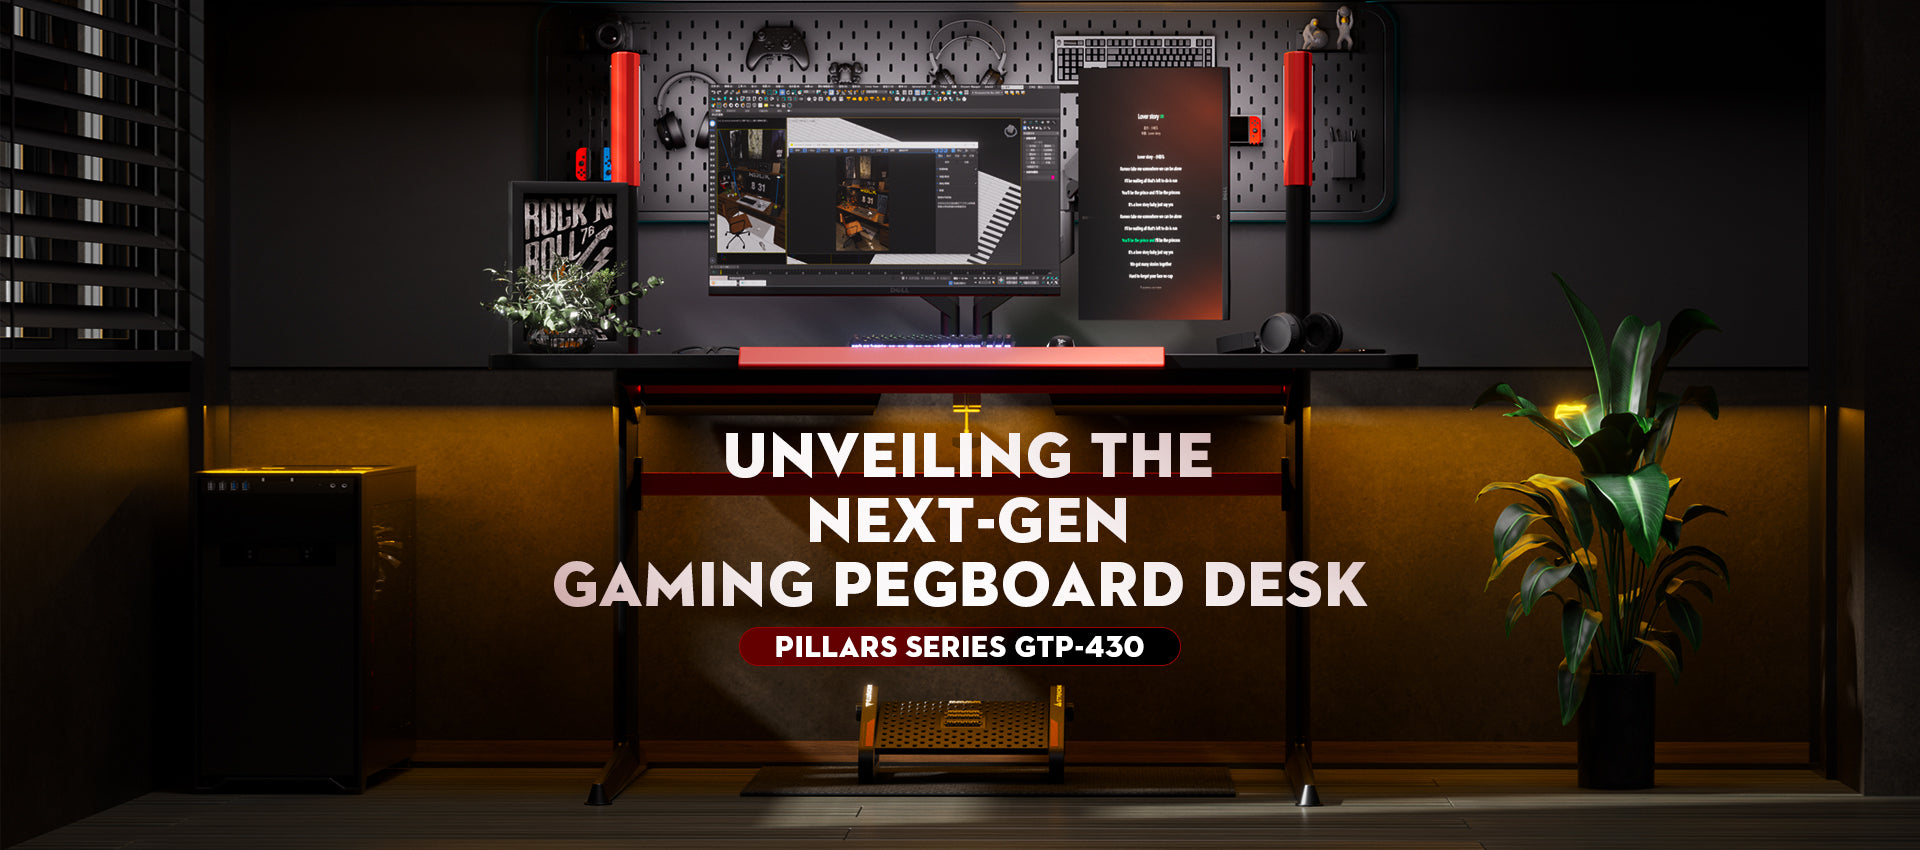 UNVEILING THE NEXT-GEN GAMING PEGBOARD DESK